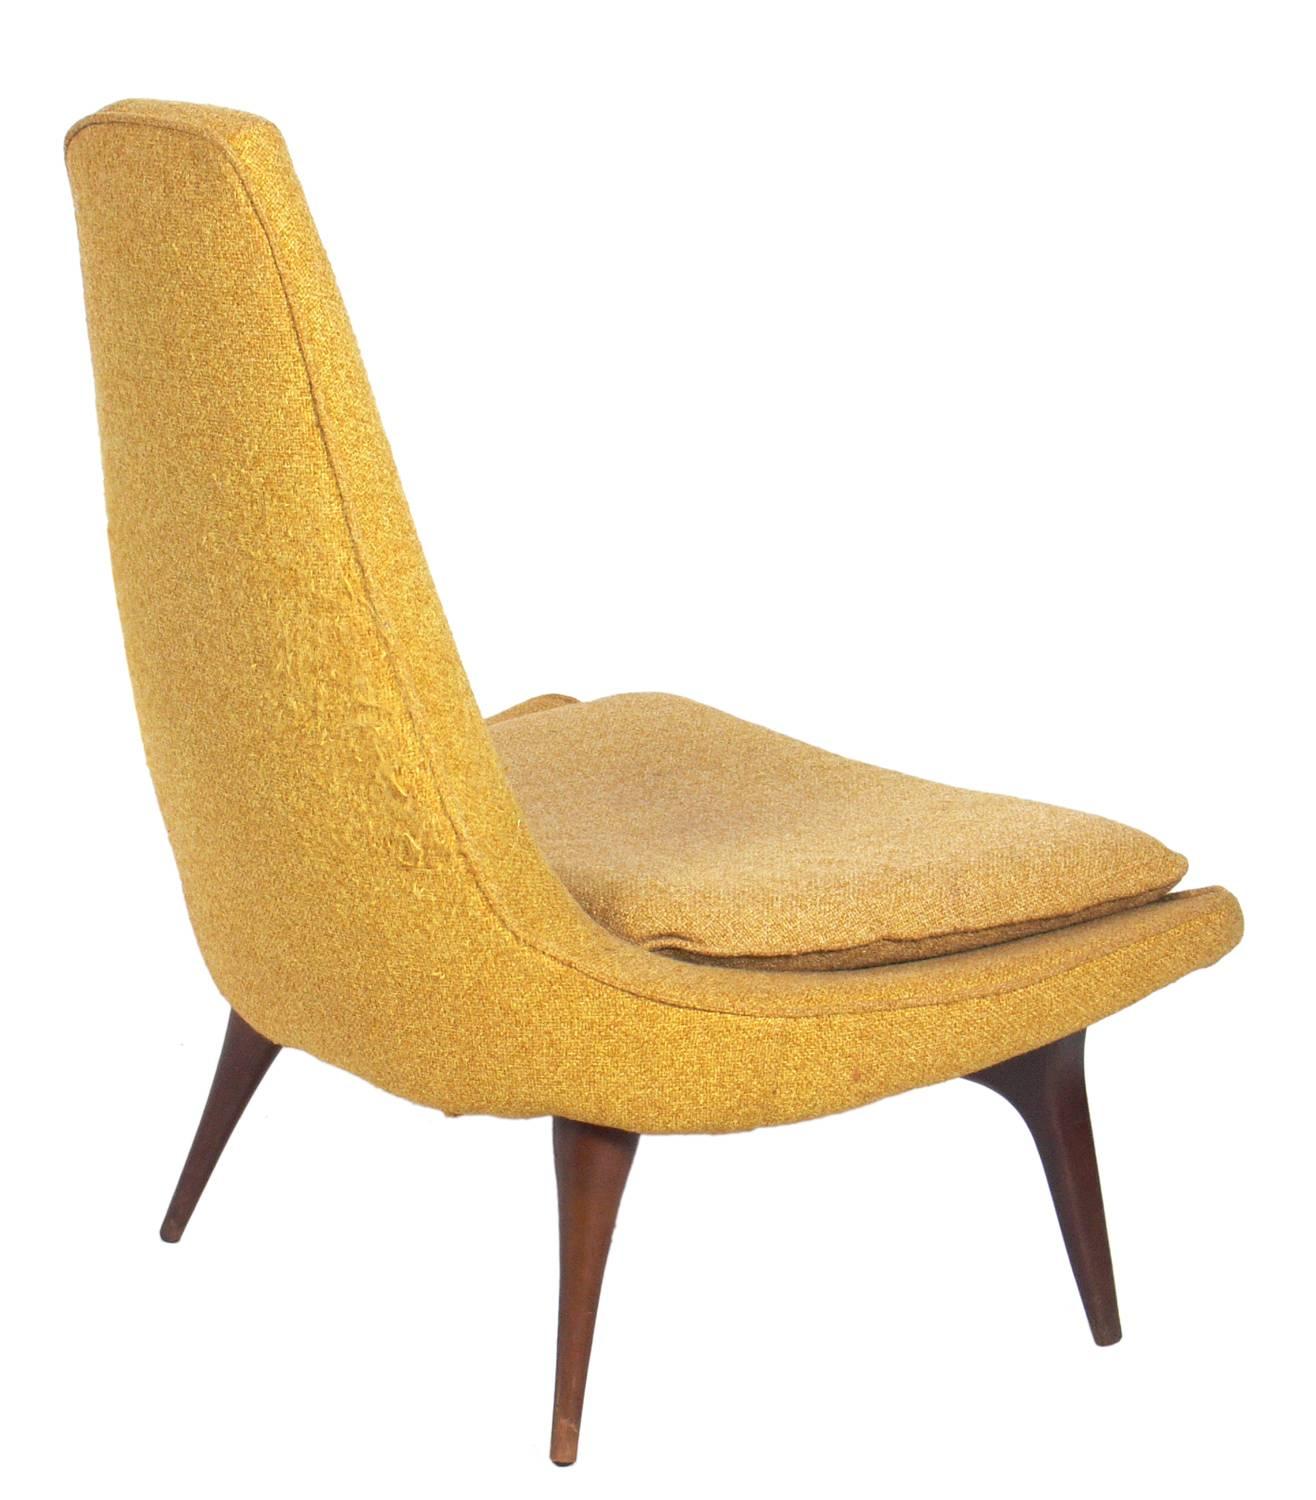 American Pair of Sculptural Mid-Century Modern Lounge Chairs by Karpen